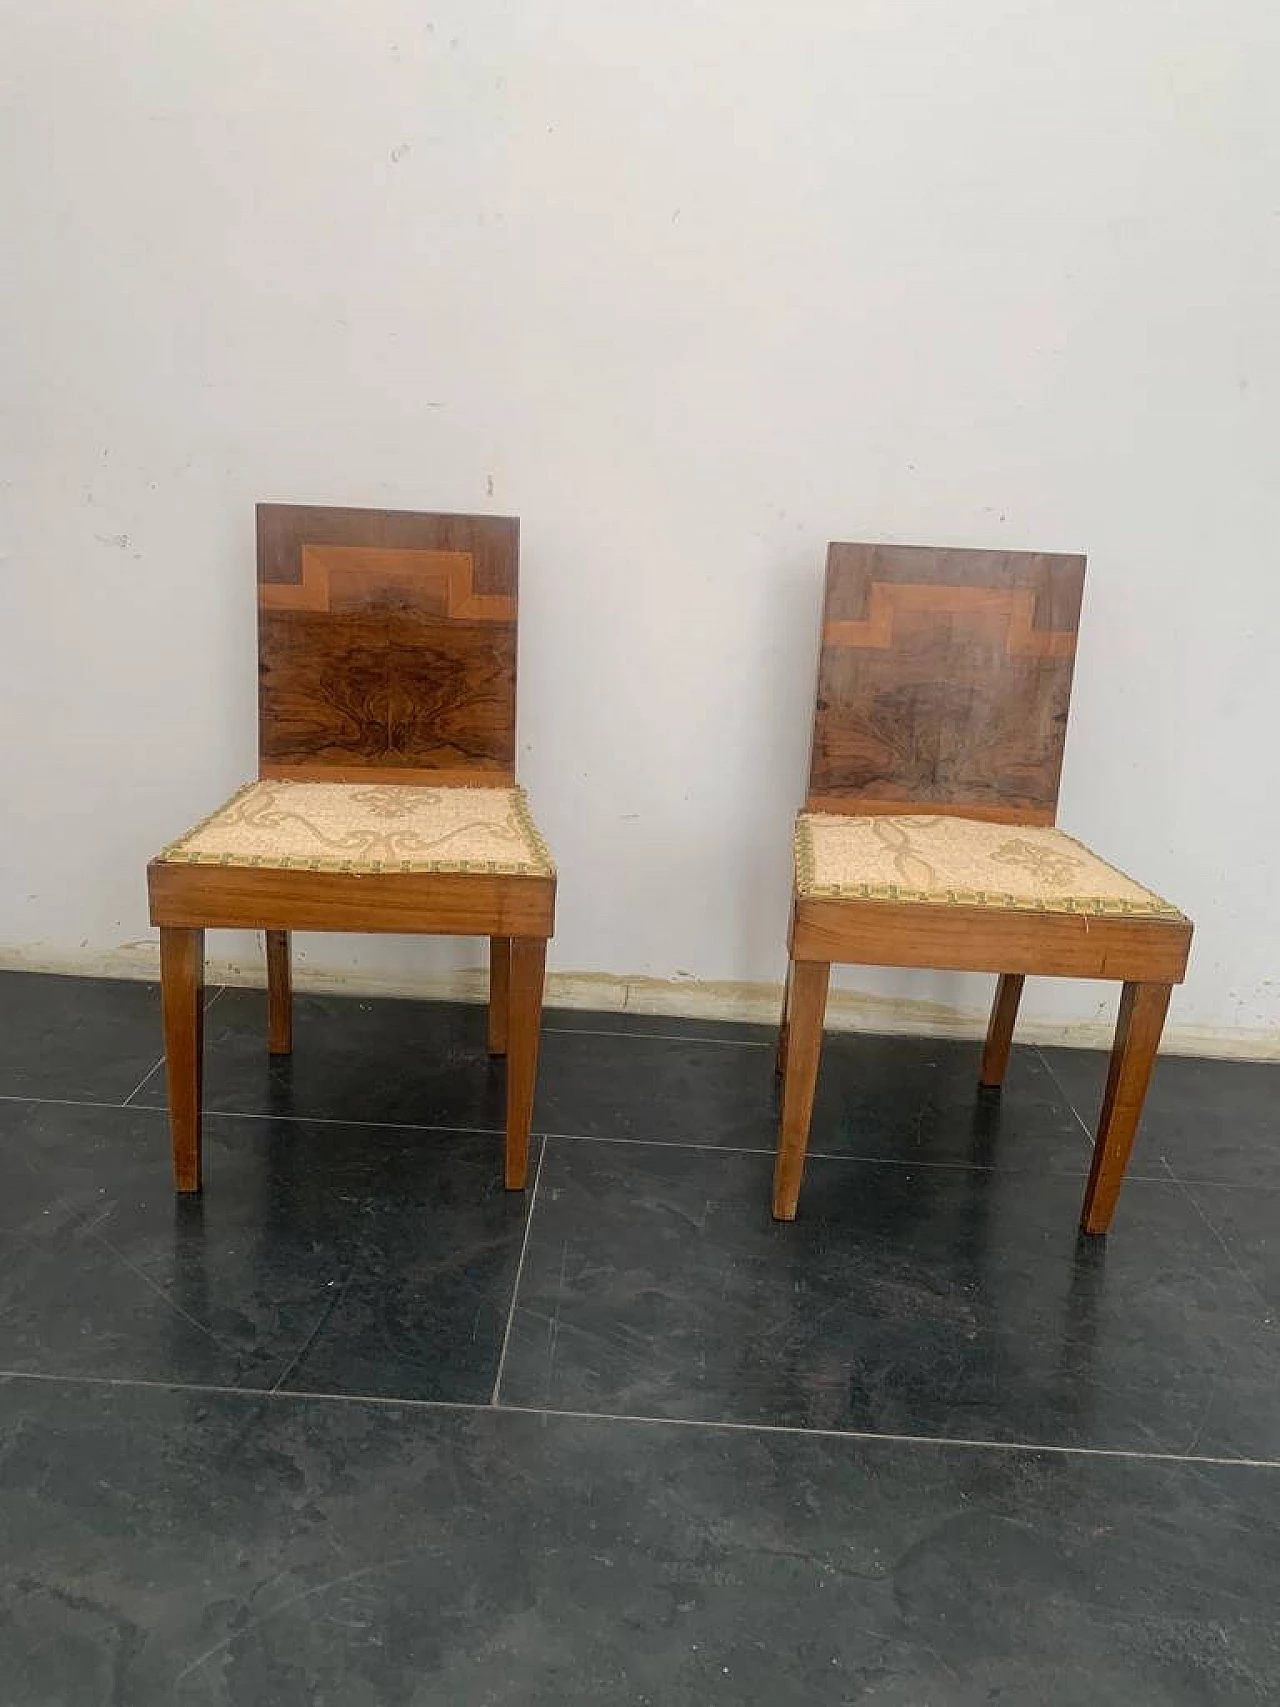 Pair of wooden chairs by Franco Vezzani, 1930s 1